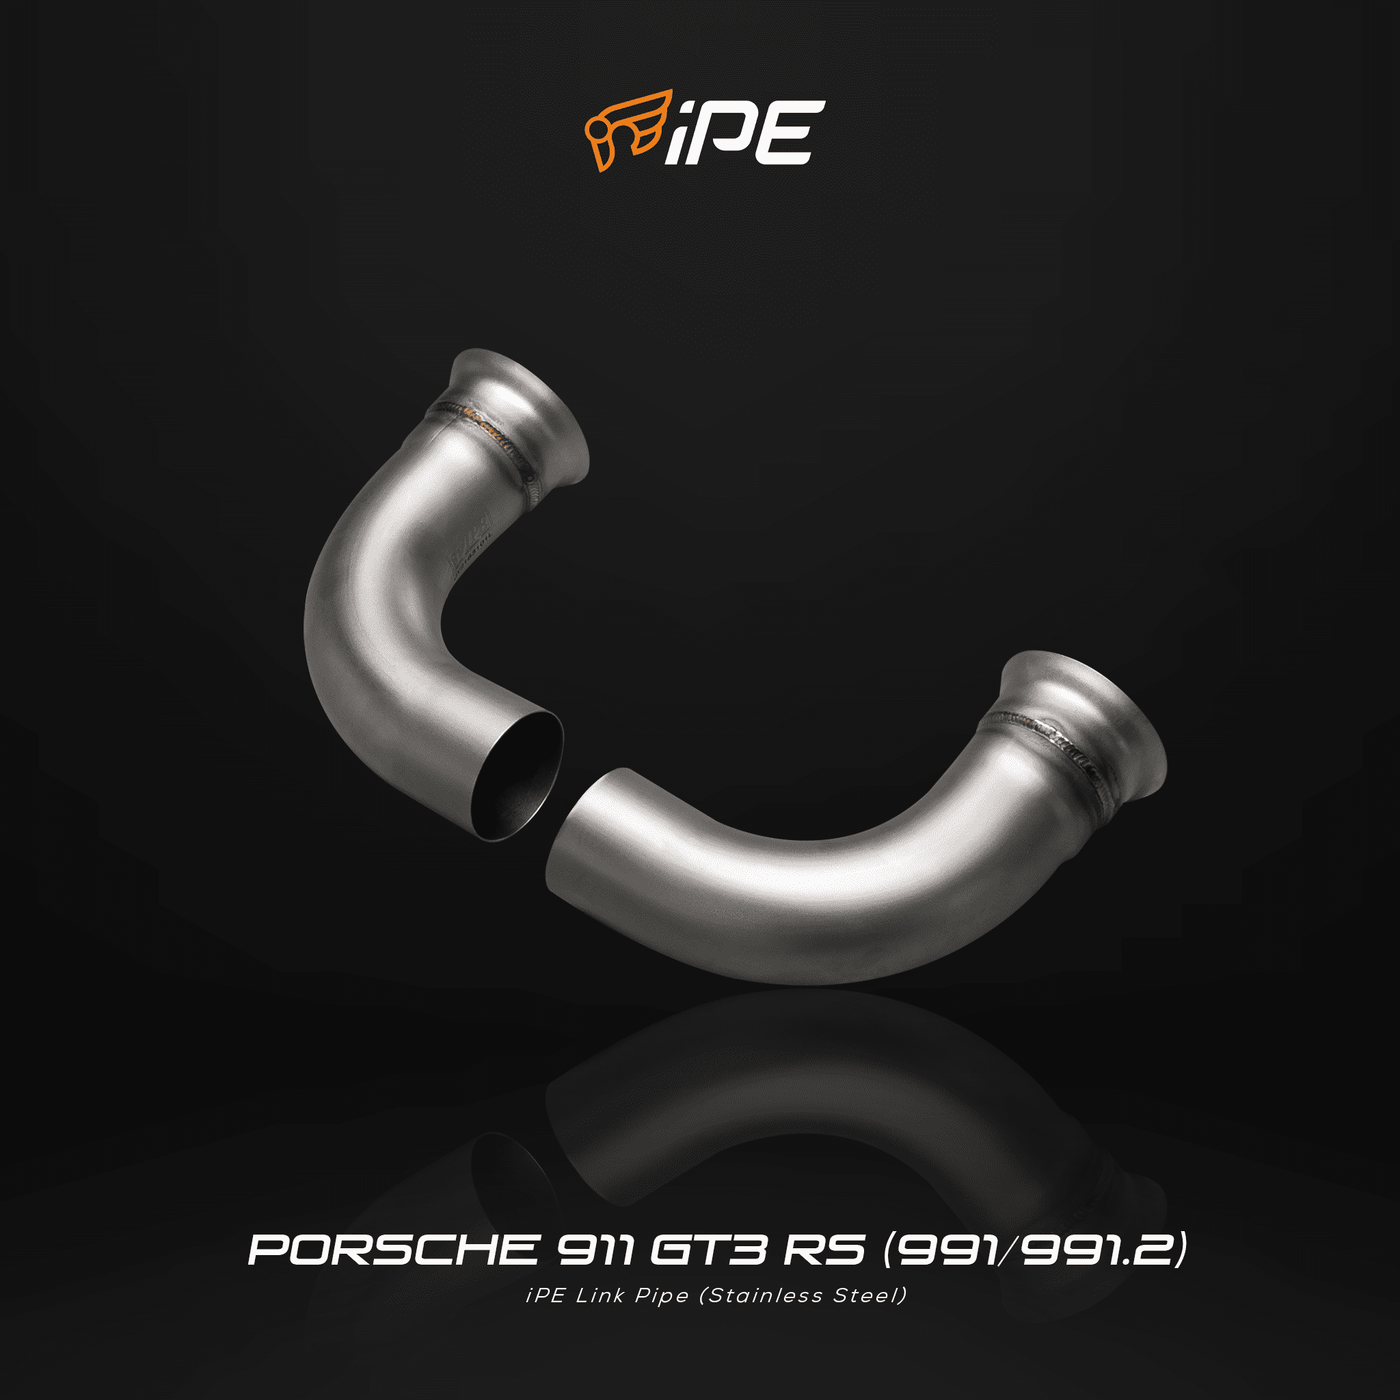 Porsche 911 GT3 / RS (991/991.2) Exhaust System - Link Pipe - Stainless Steel